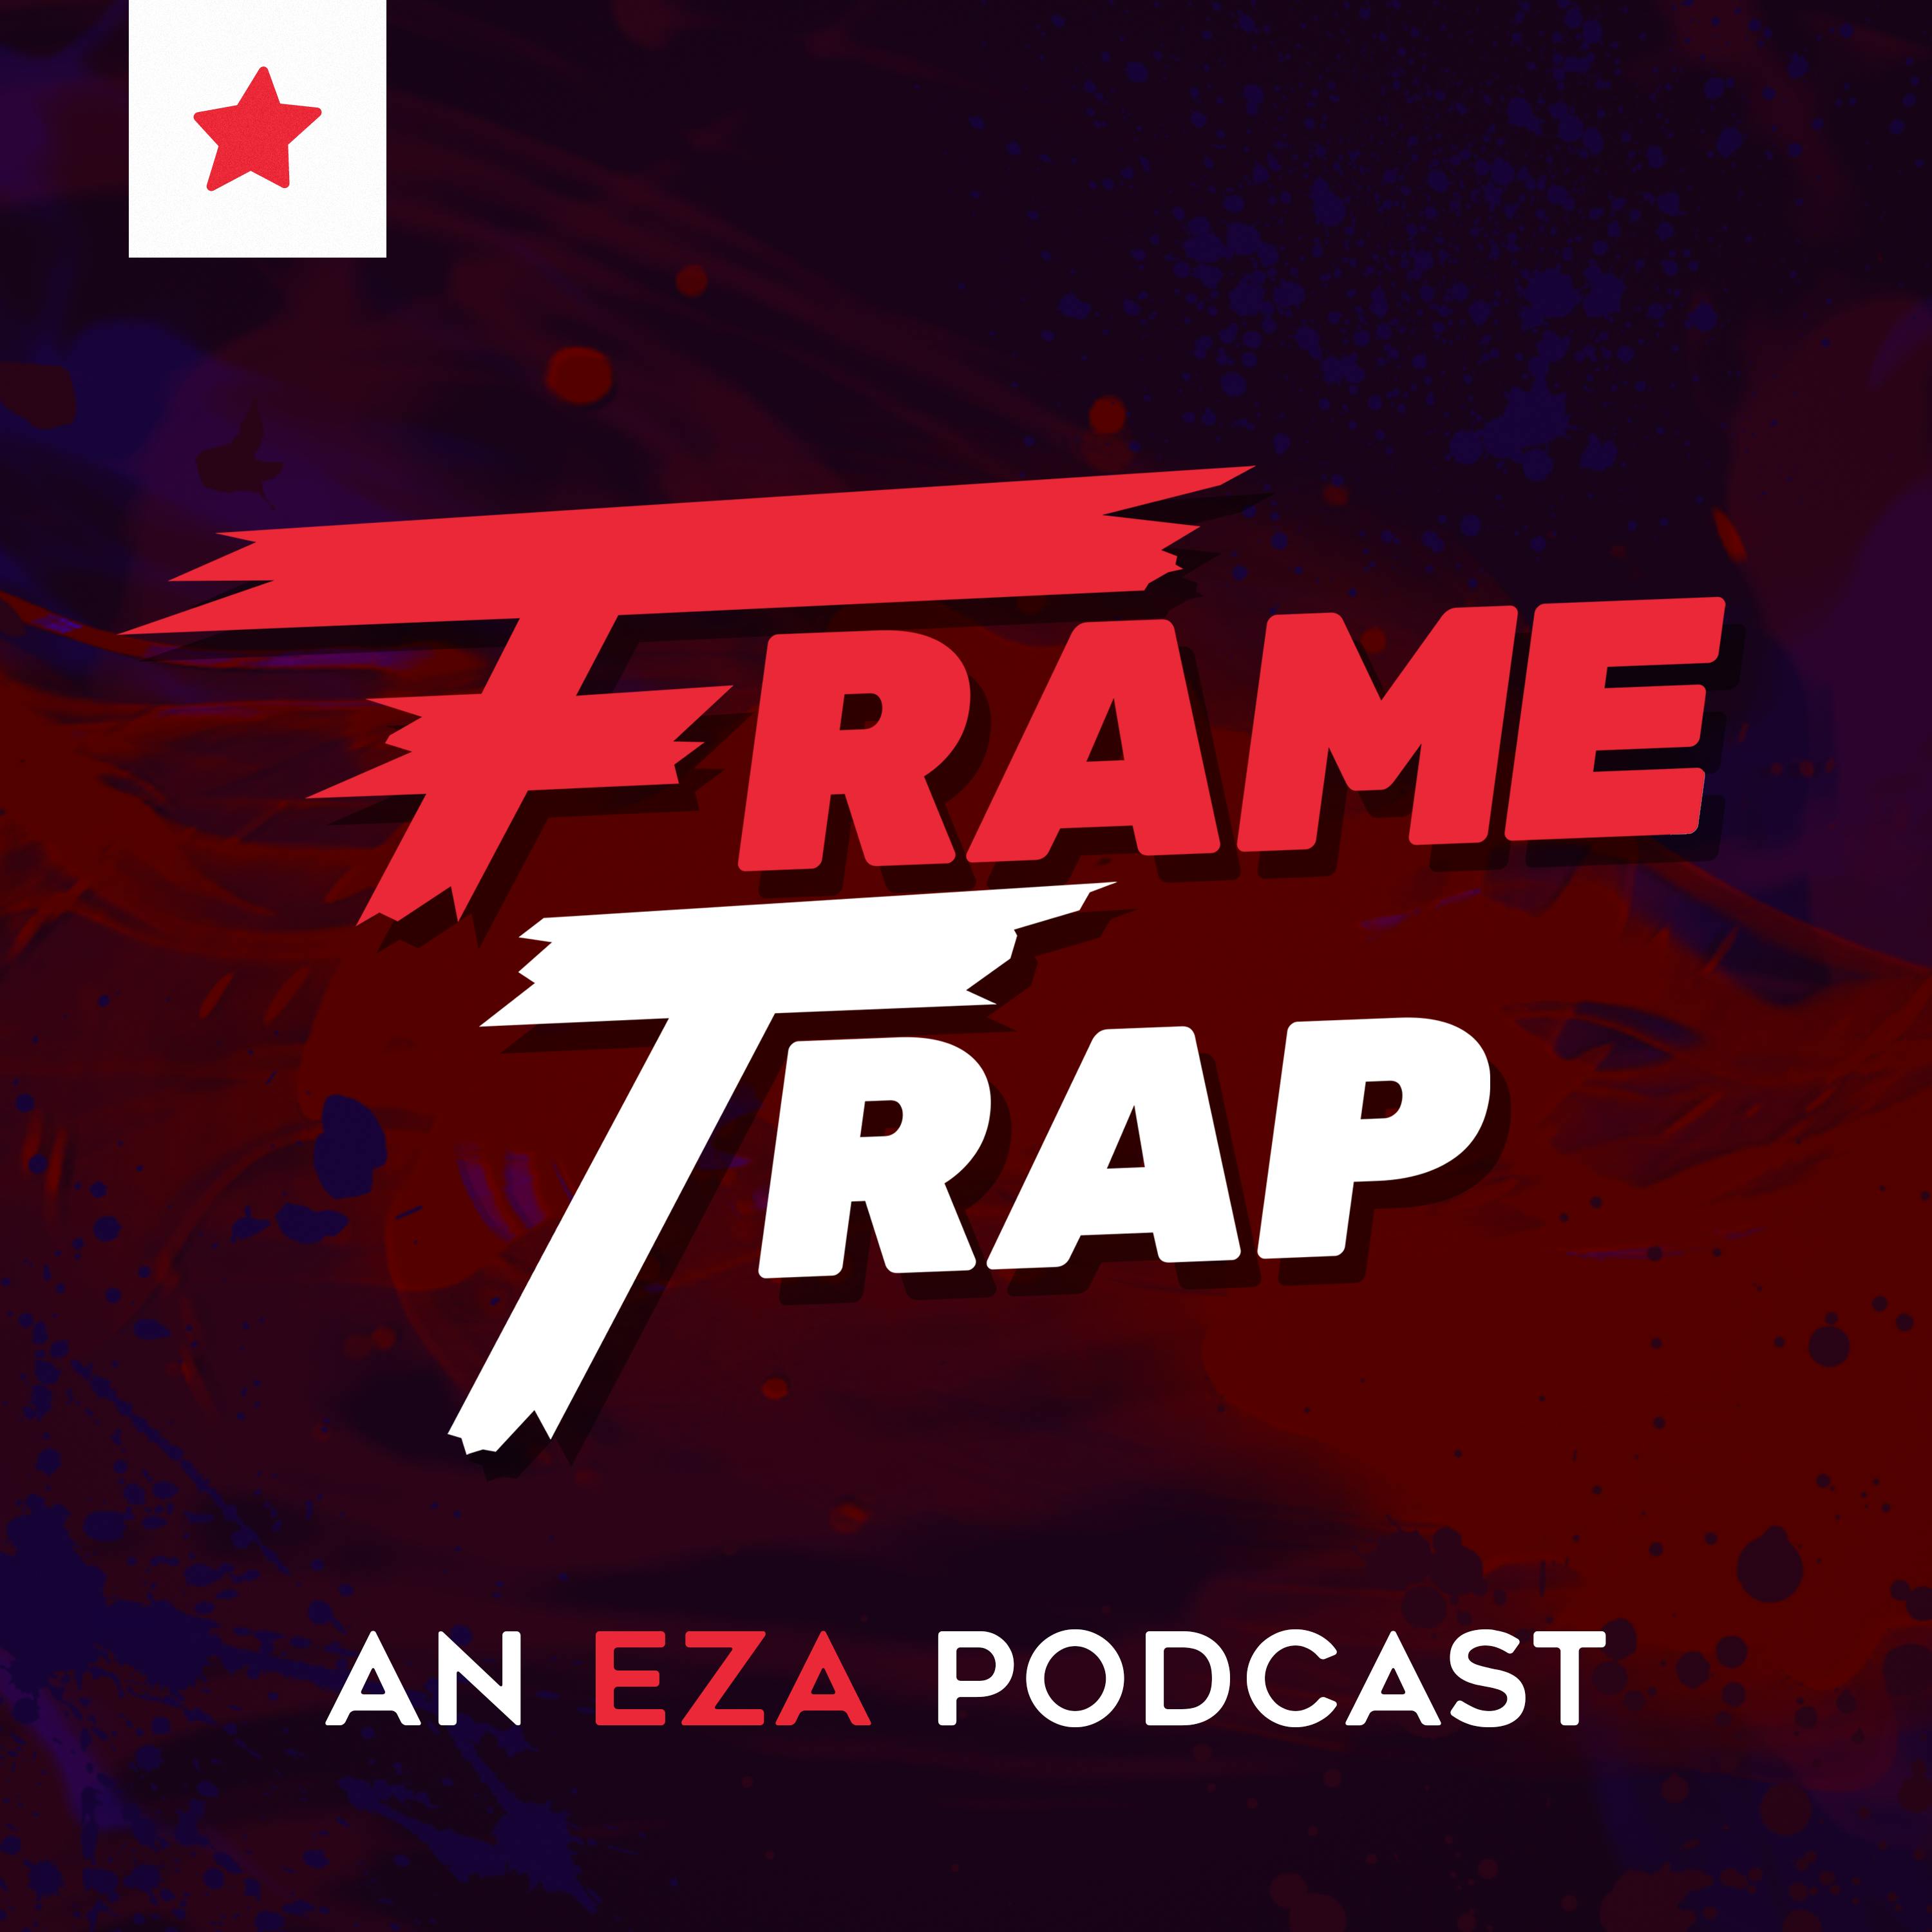 Frame Trap - Episode 195 "Everything Going Crazy"